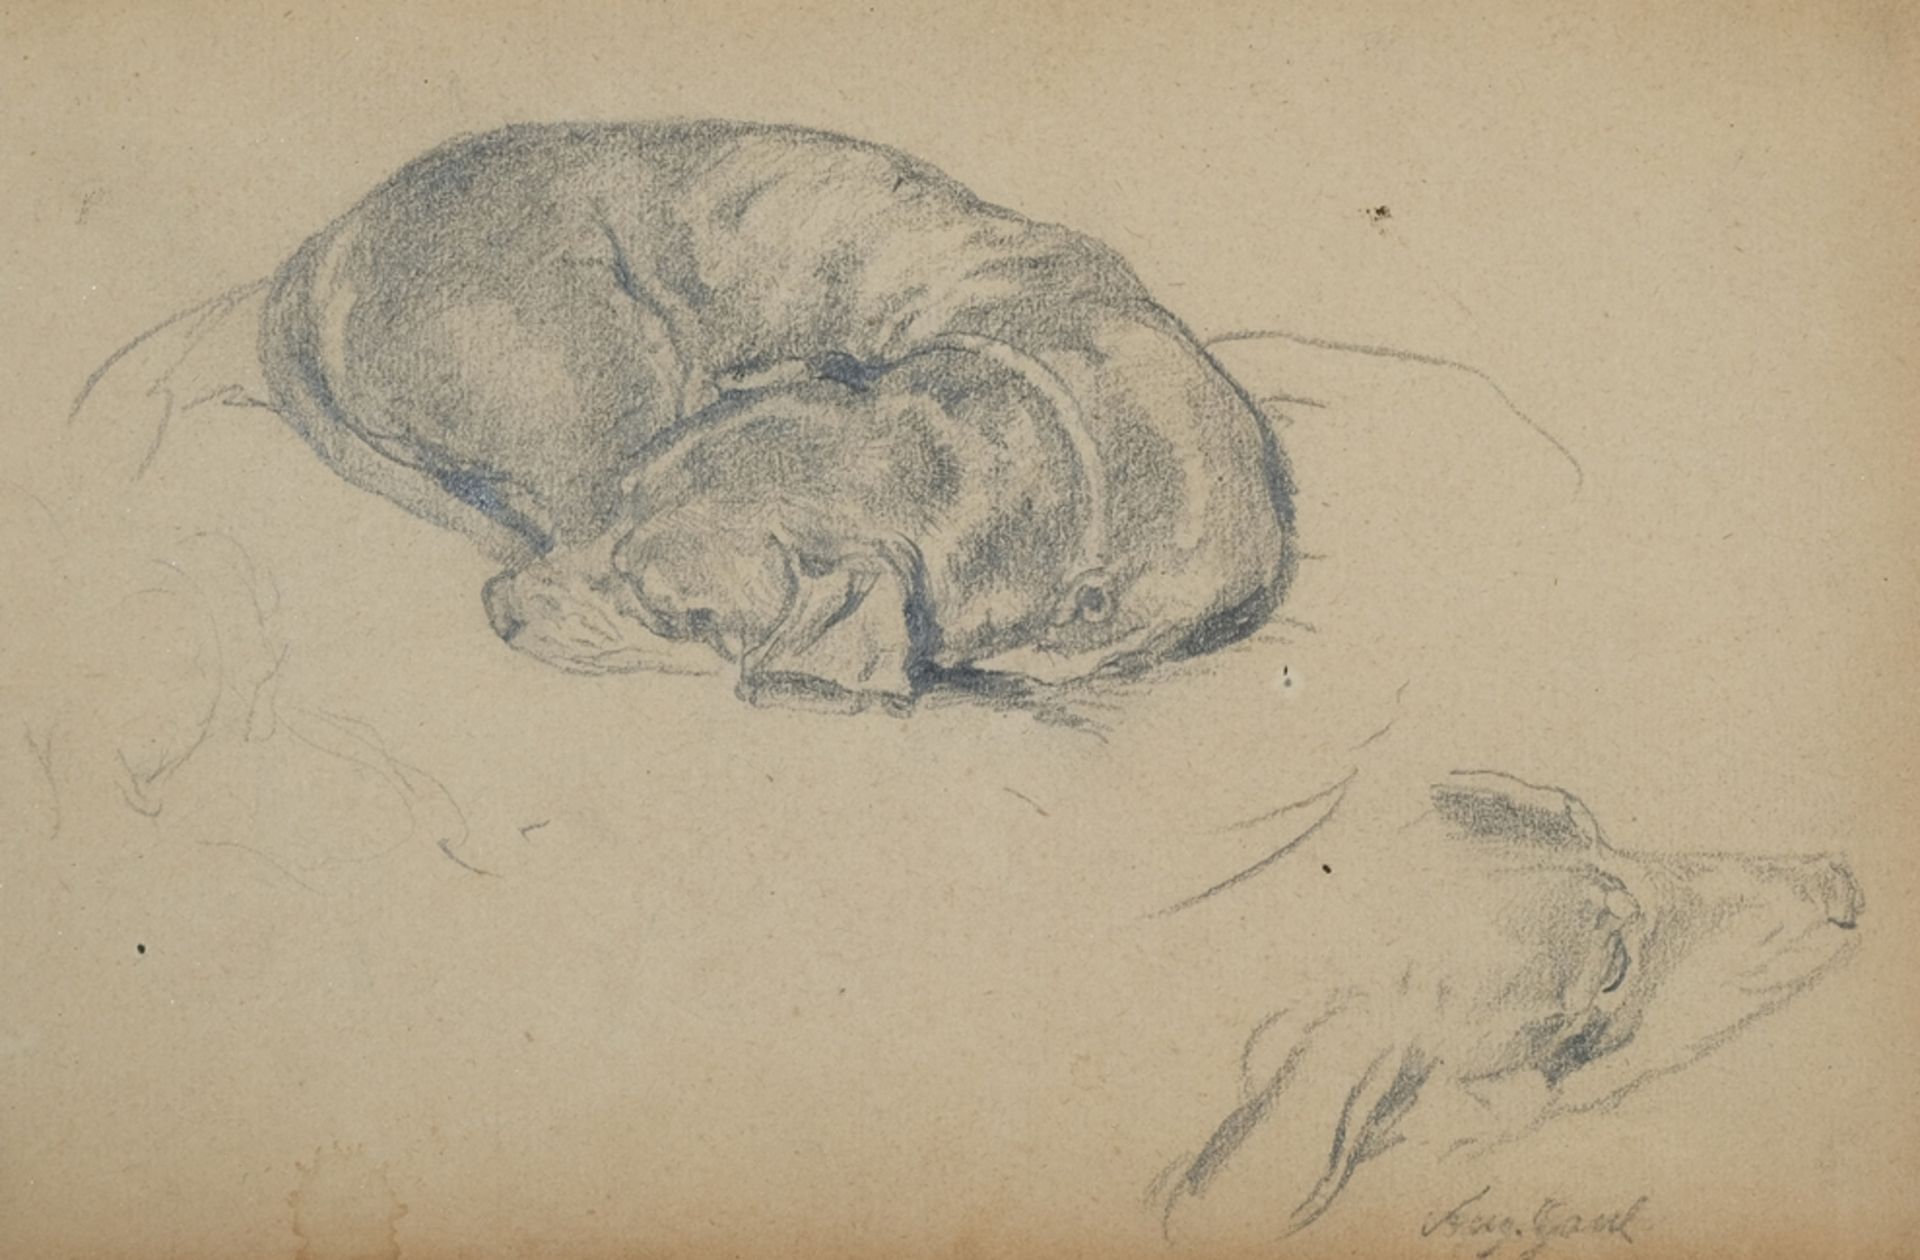 Gaul, Georg August (1869-1921) Dog Study, pencil drawing on paper. 